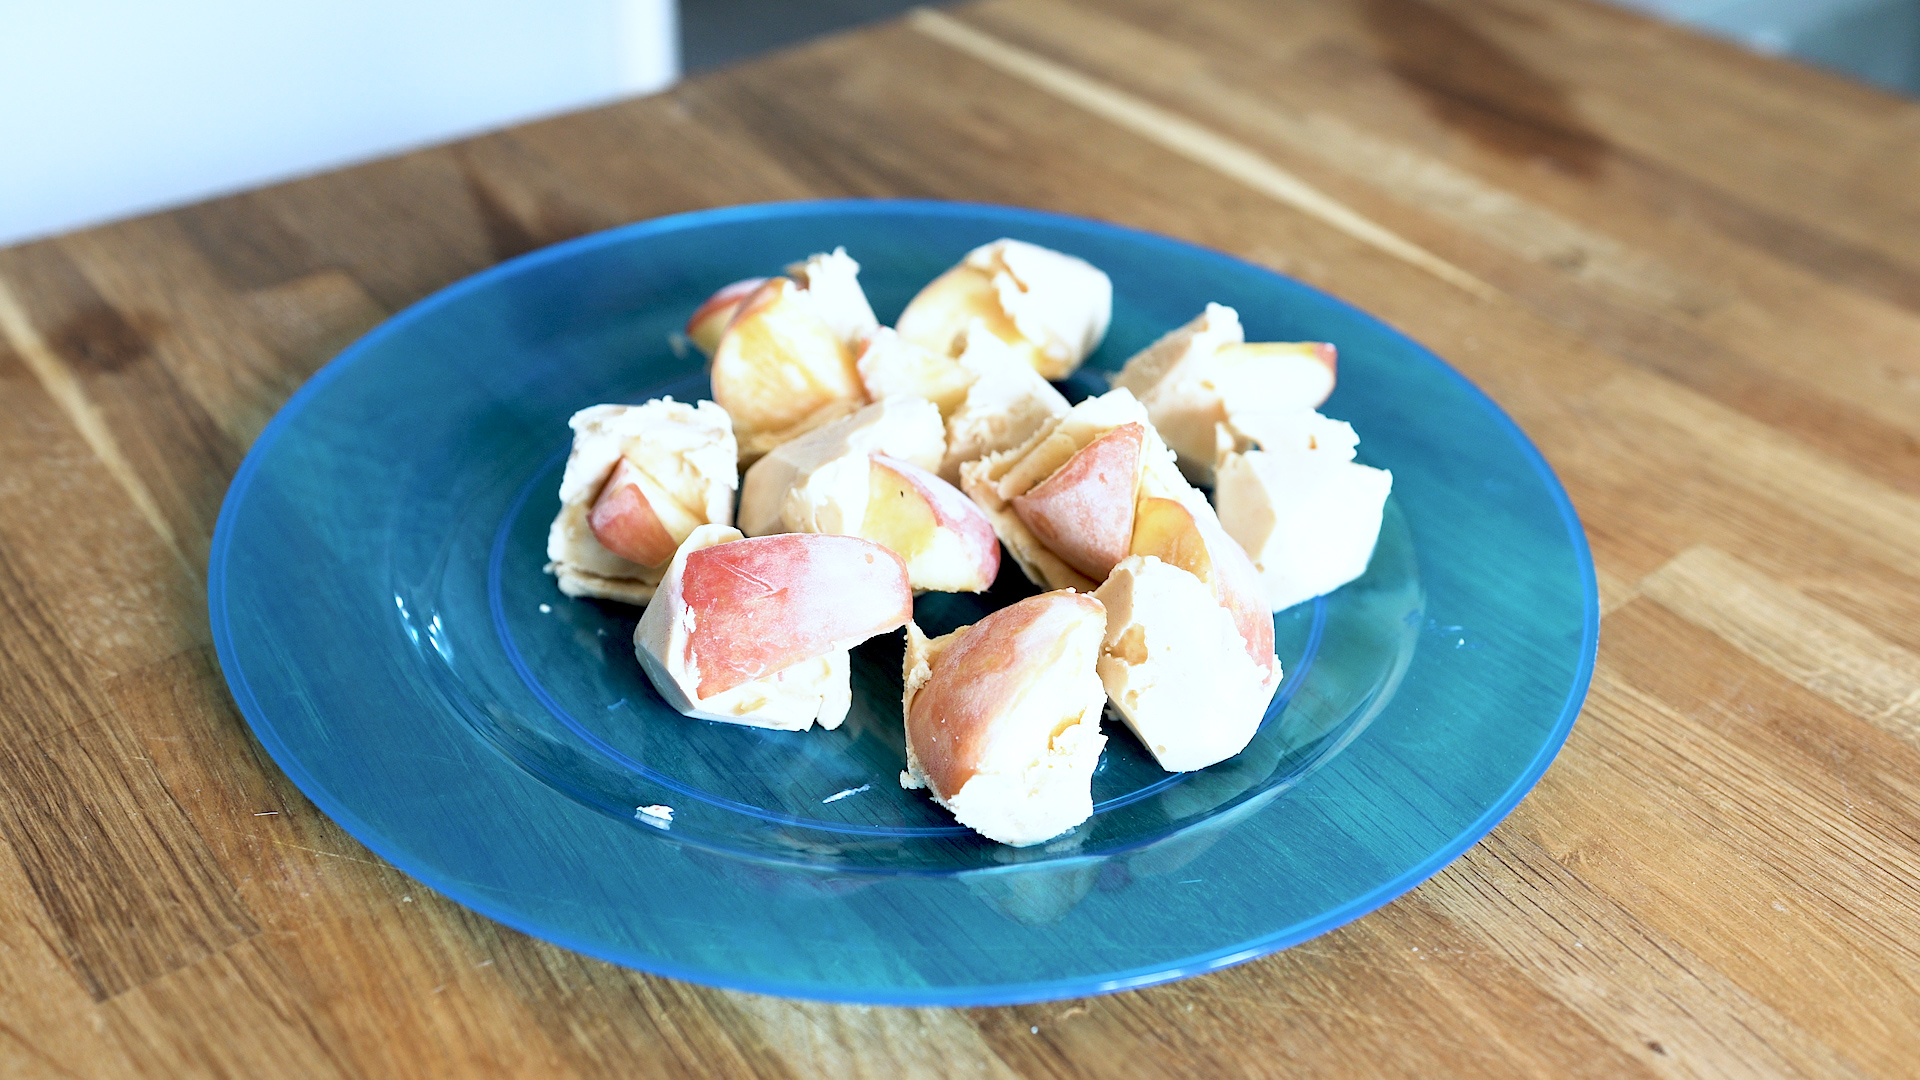 Apple and peanut butter frozen bites on a plate